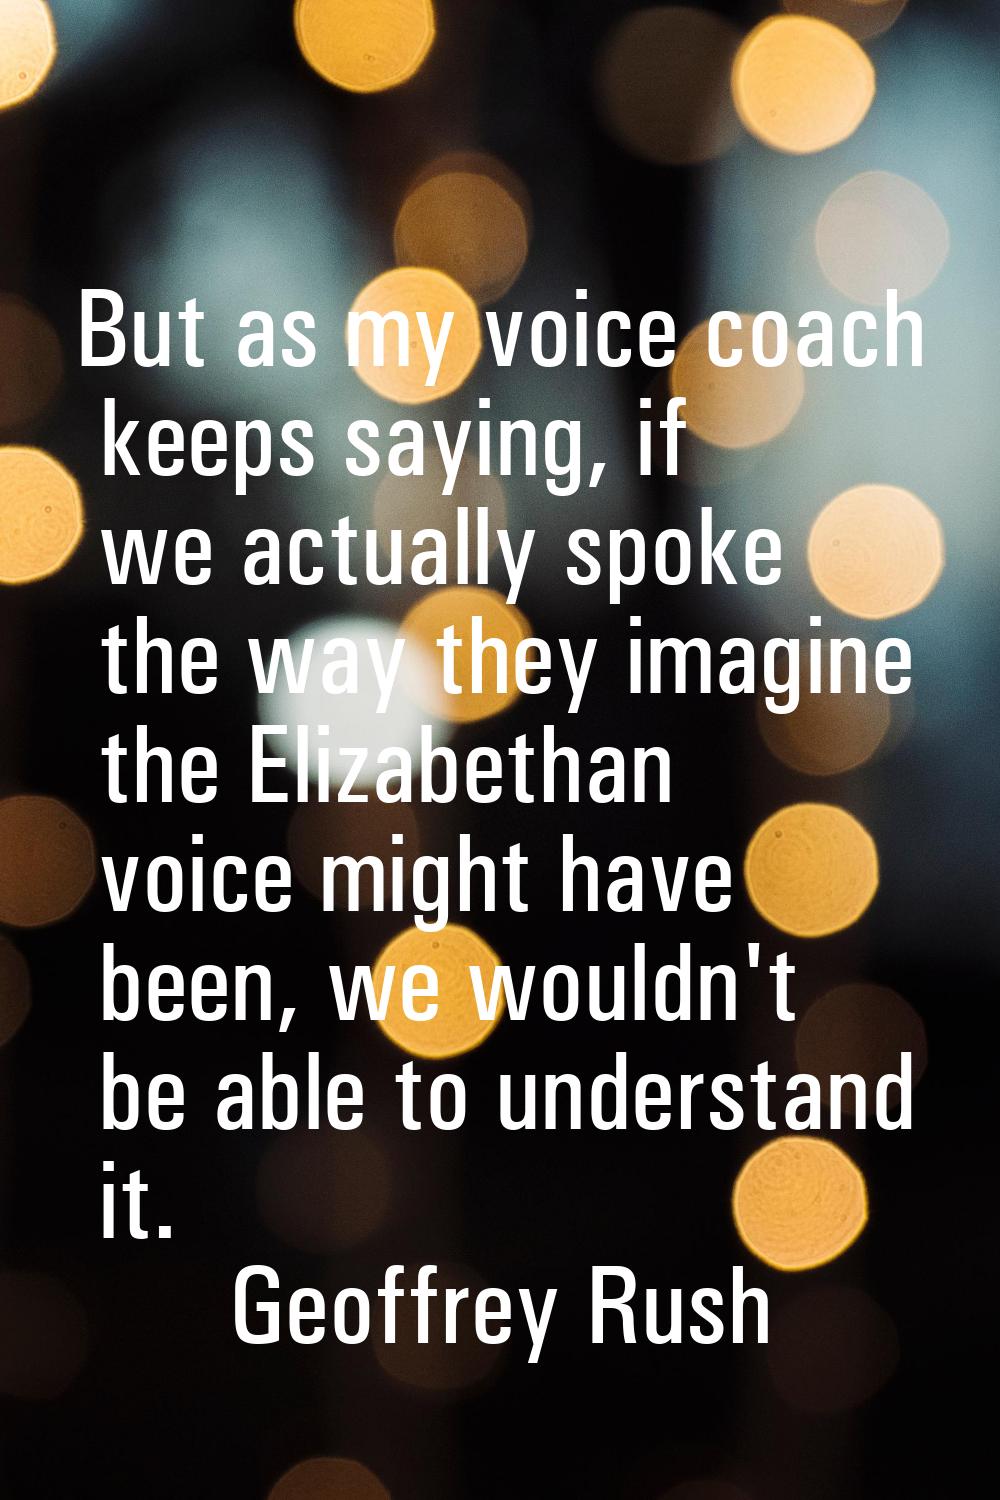 But as my voice coach keeps saying, if we actually spoke the way they imagine the Elizabethan voice